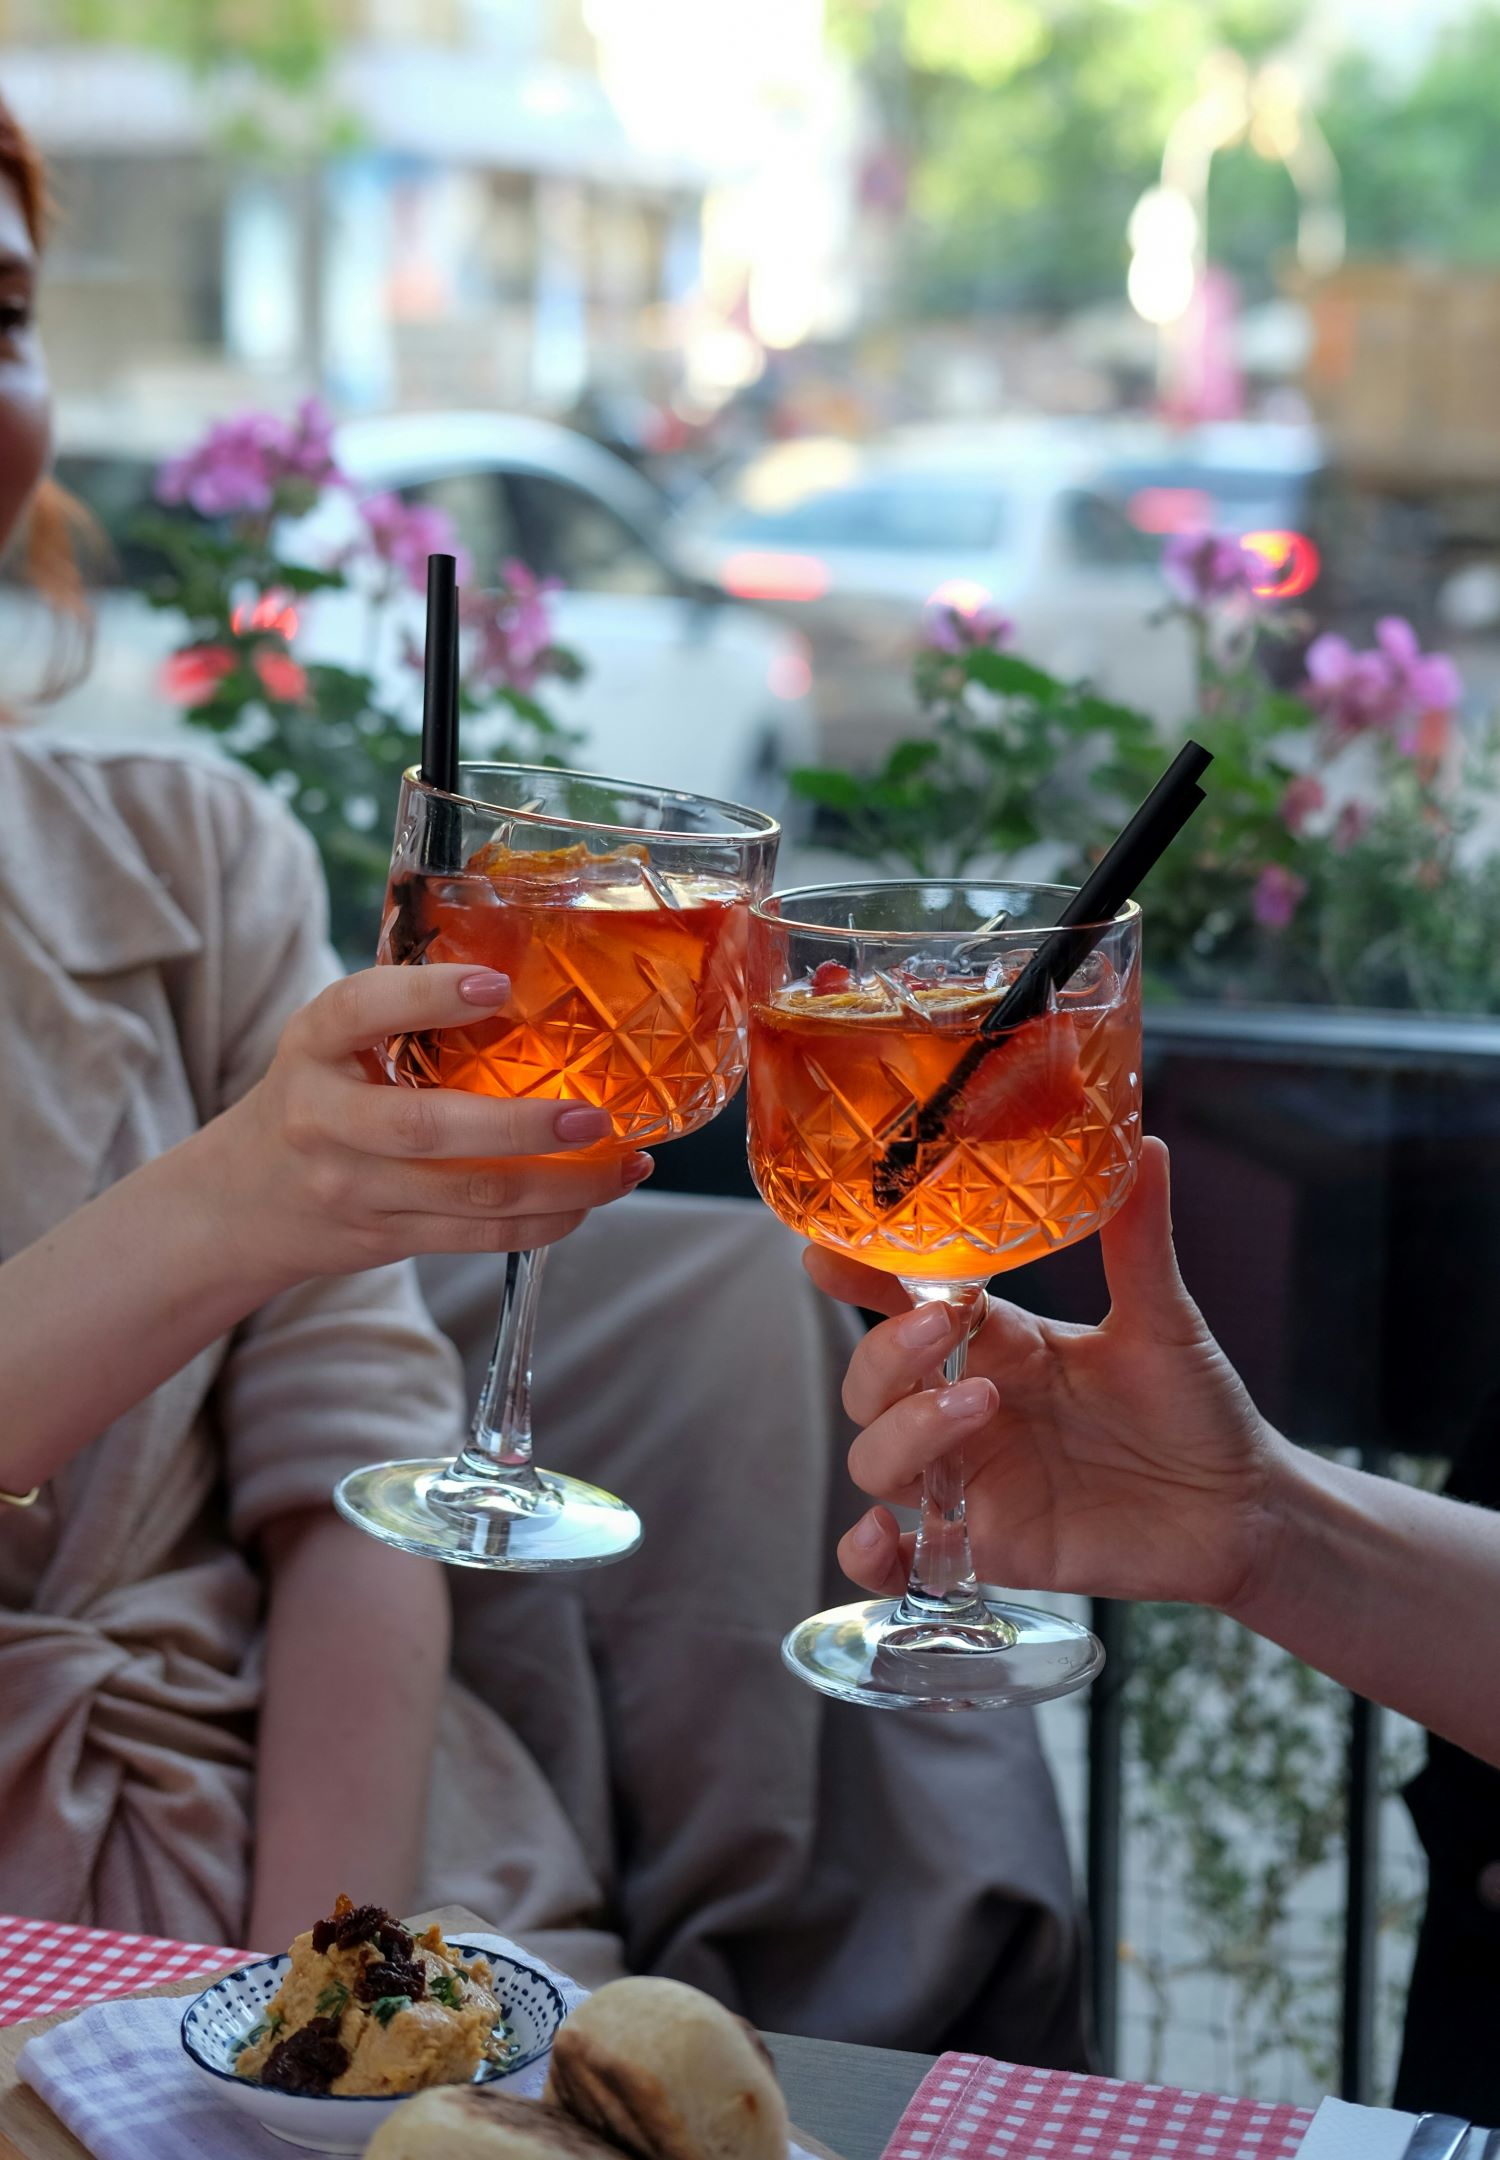 An image of two people holding cocktails.